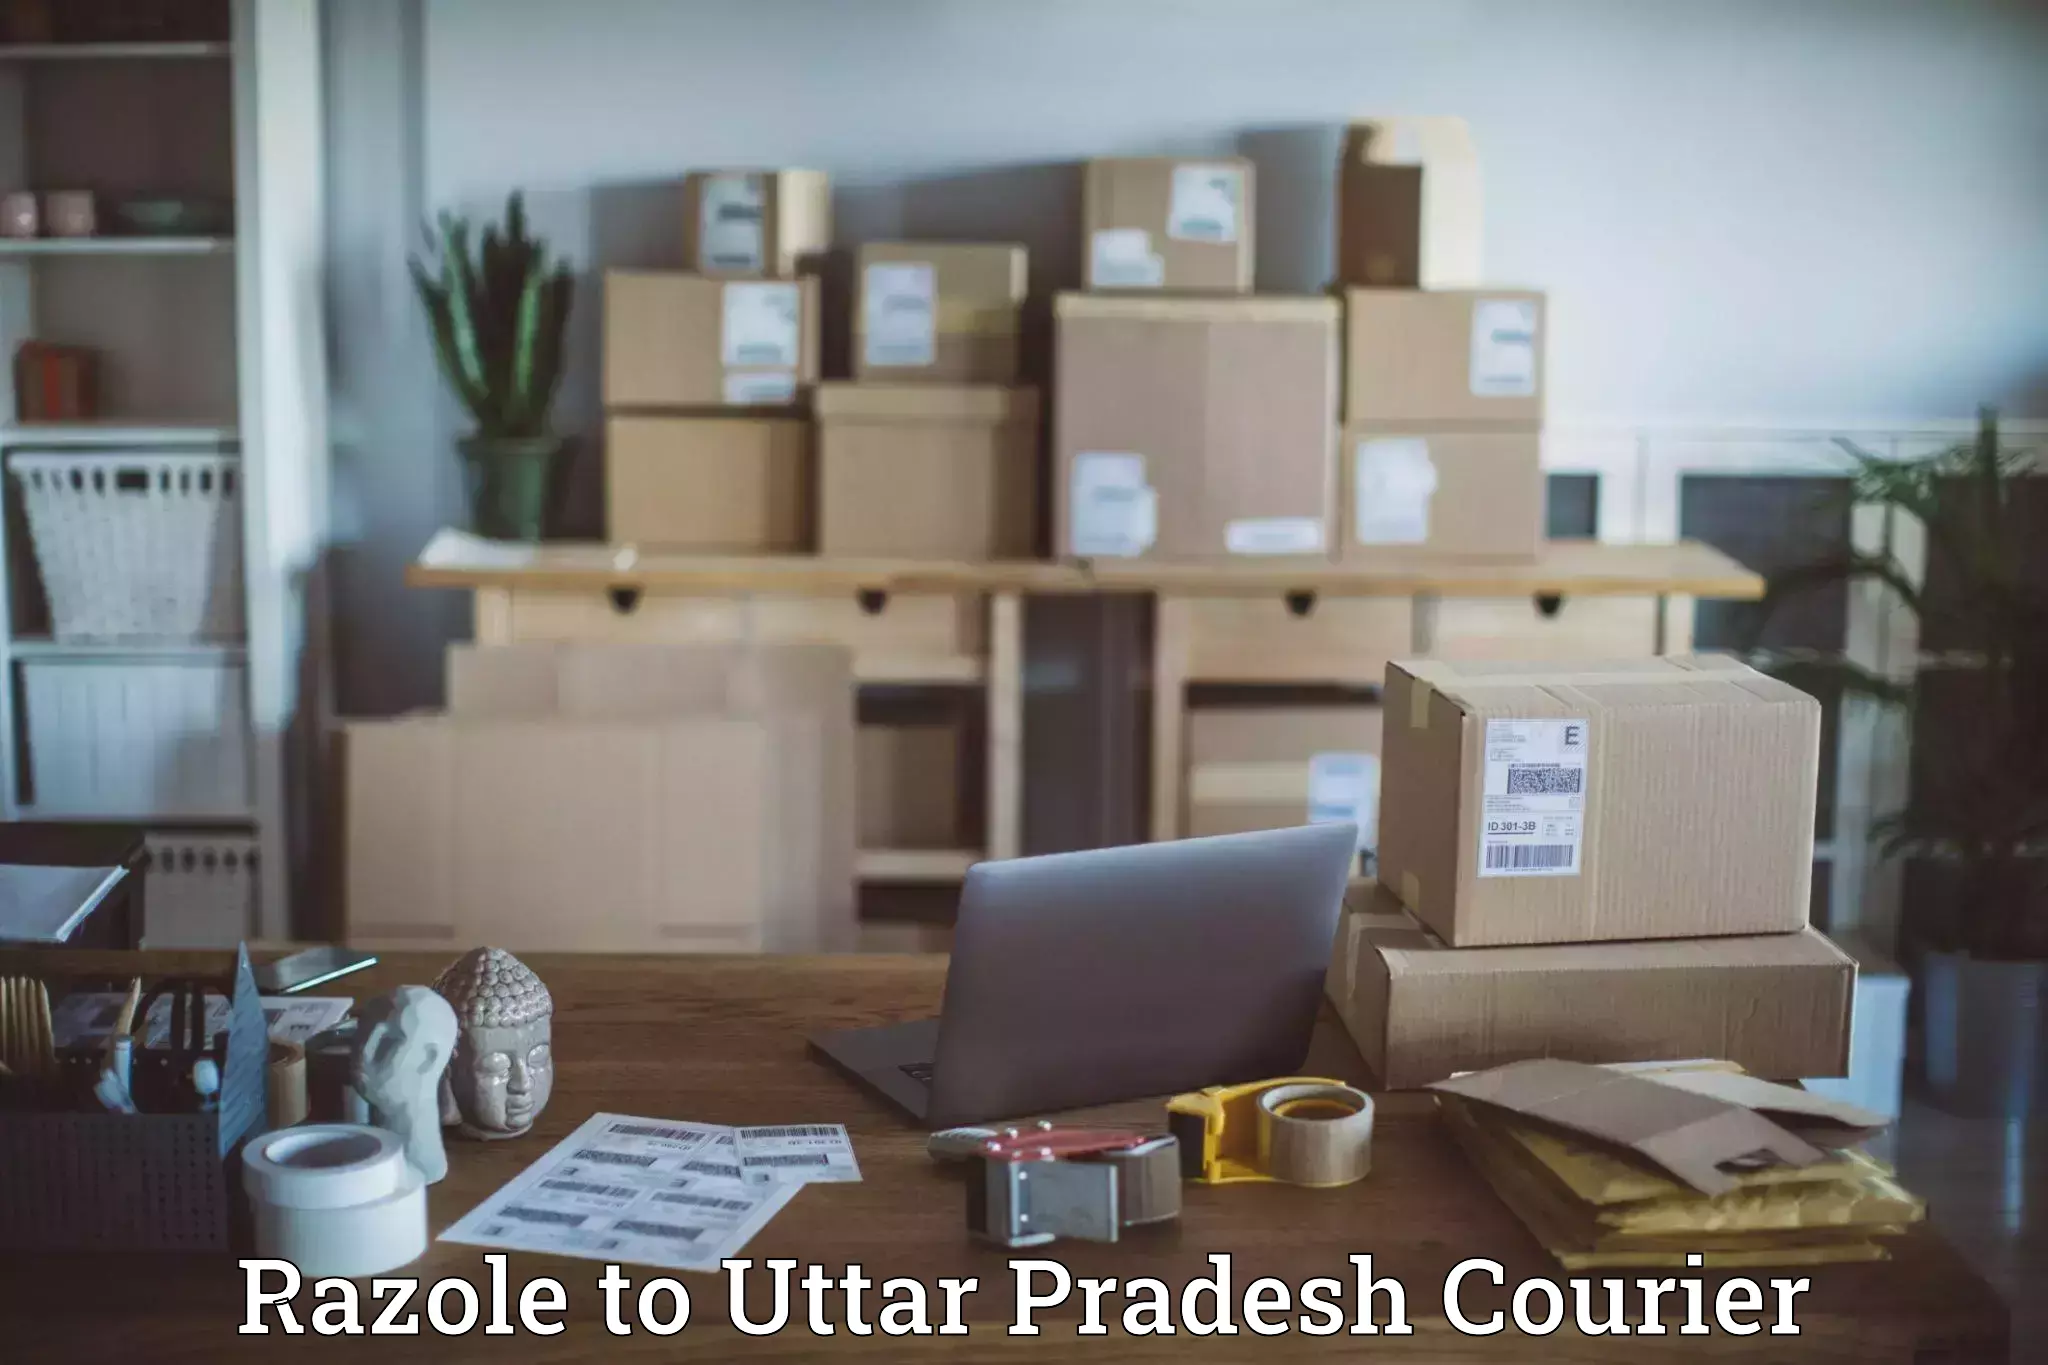 24-hour delivery options in Razole to Uttar Pradesh